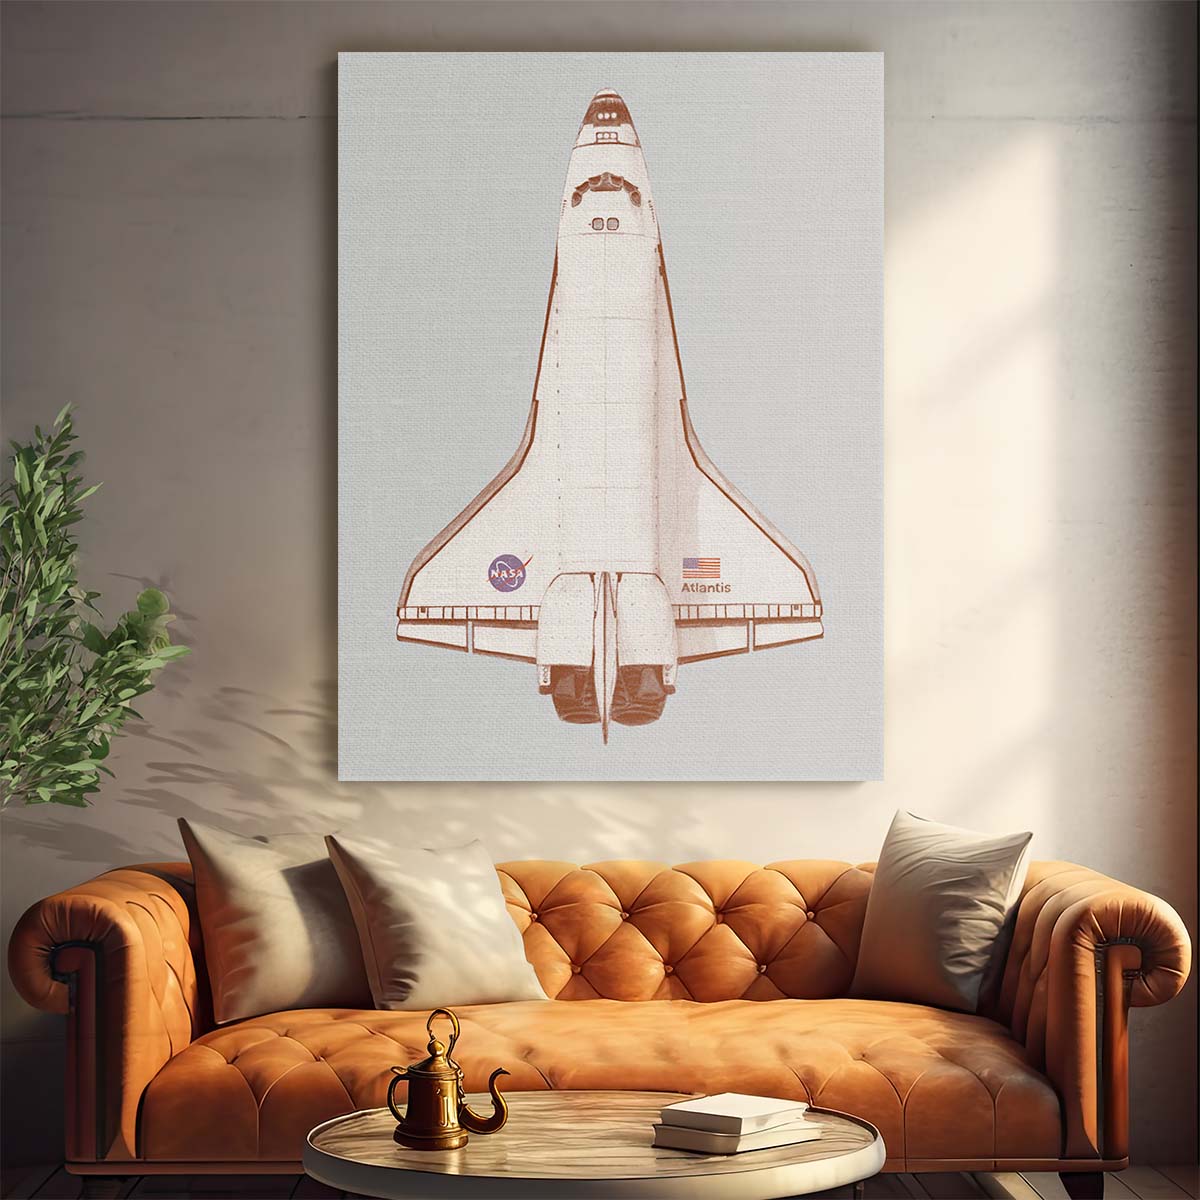 NASA Atlantis Space Shuttle Illustrated Aviation Poster, USA by Luxuriance Designs, made in USA